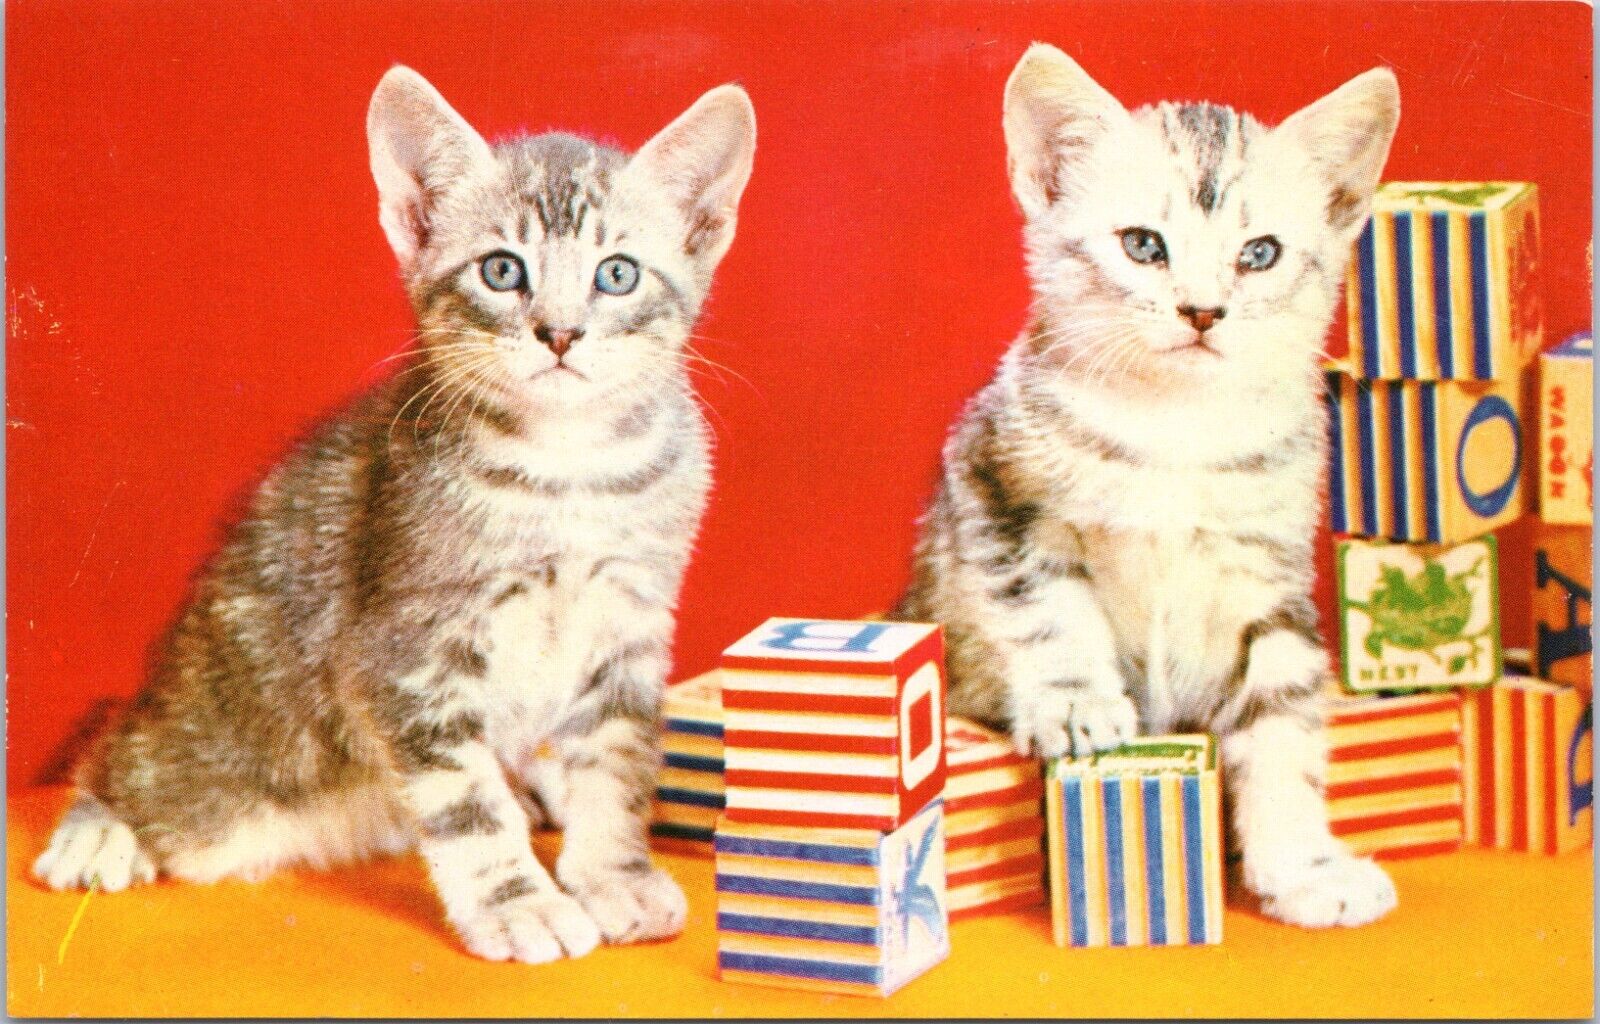 c1960\'s Kittens with toy blocks, Vintage Chrome Postcard, really nice card, cats